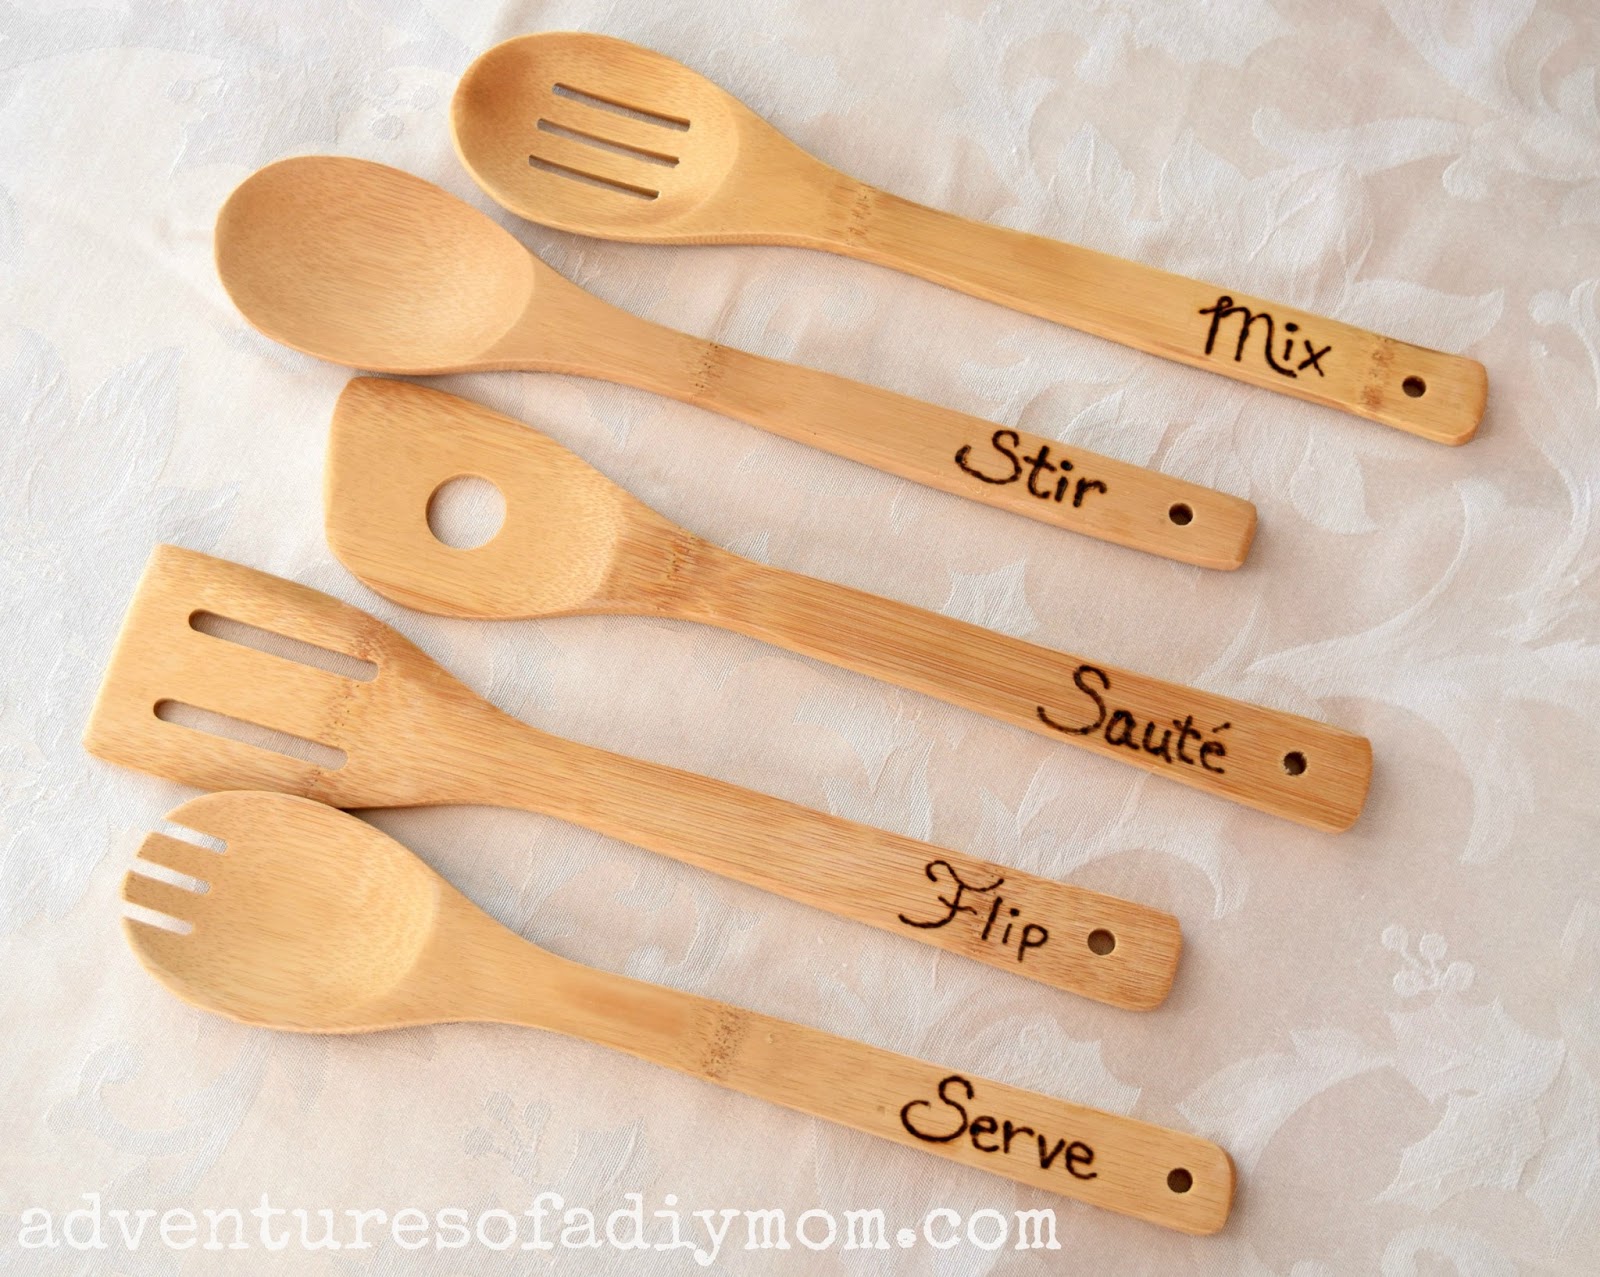 Wood Burned Wooden Spoons & Wood Burning Tips - Adventures of a DIY Mom